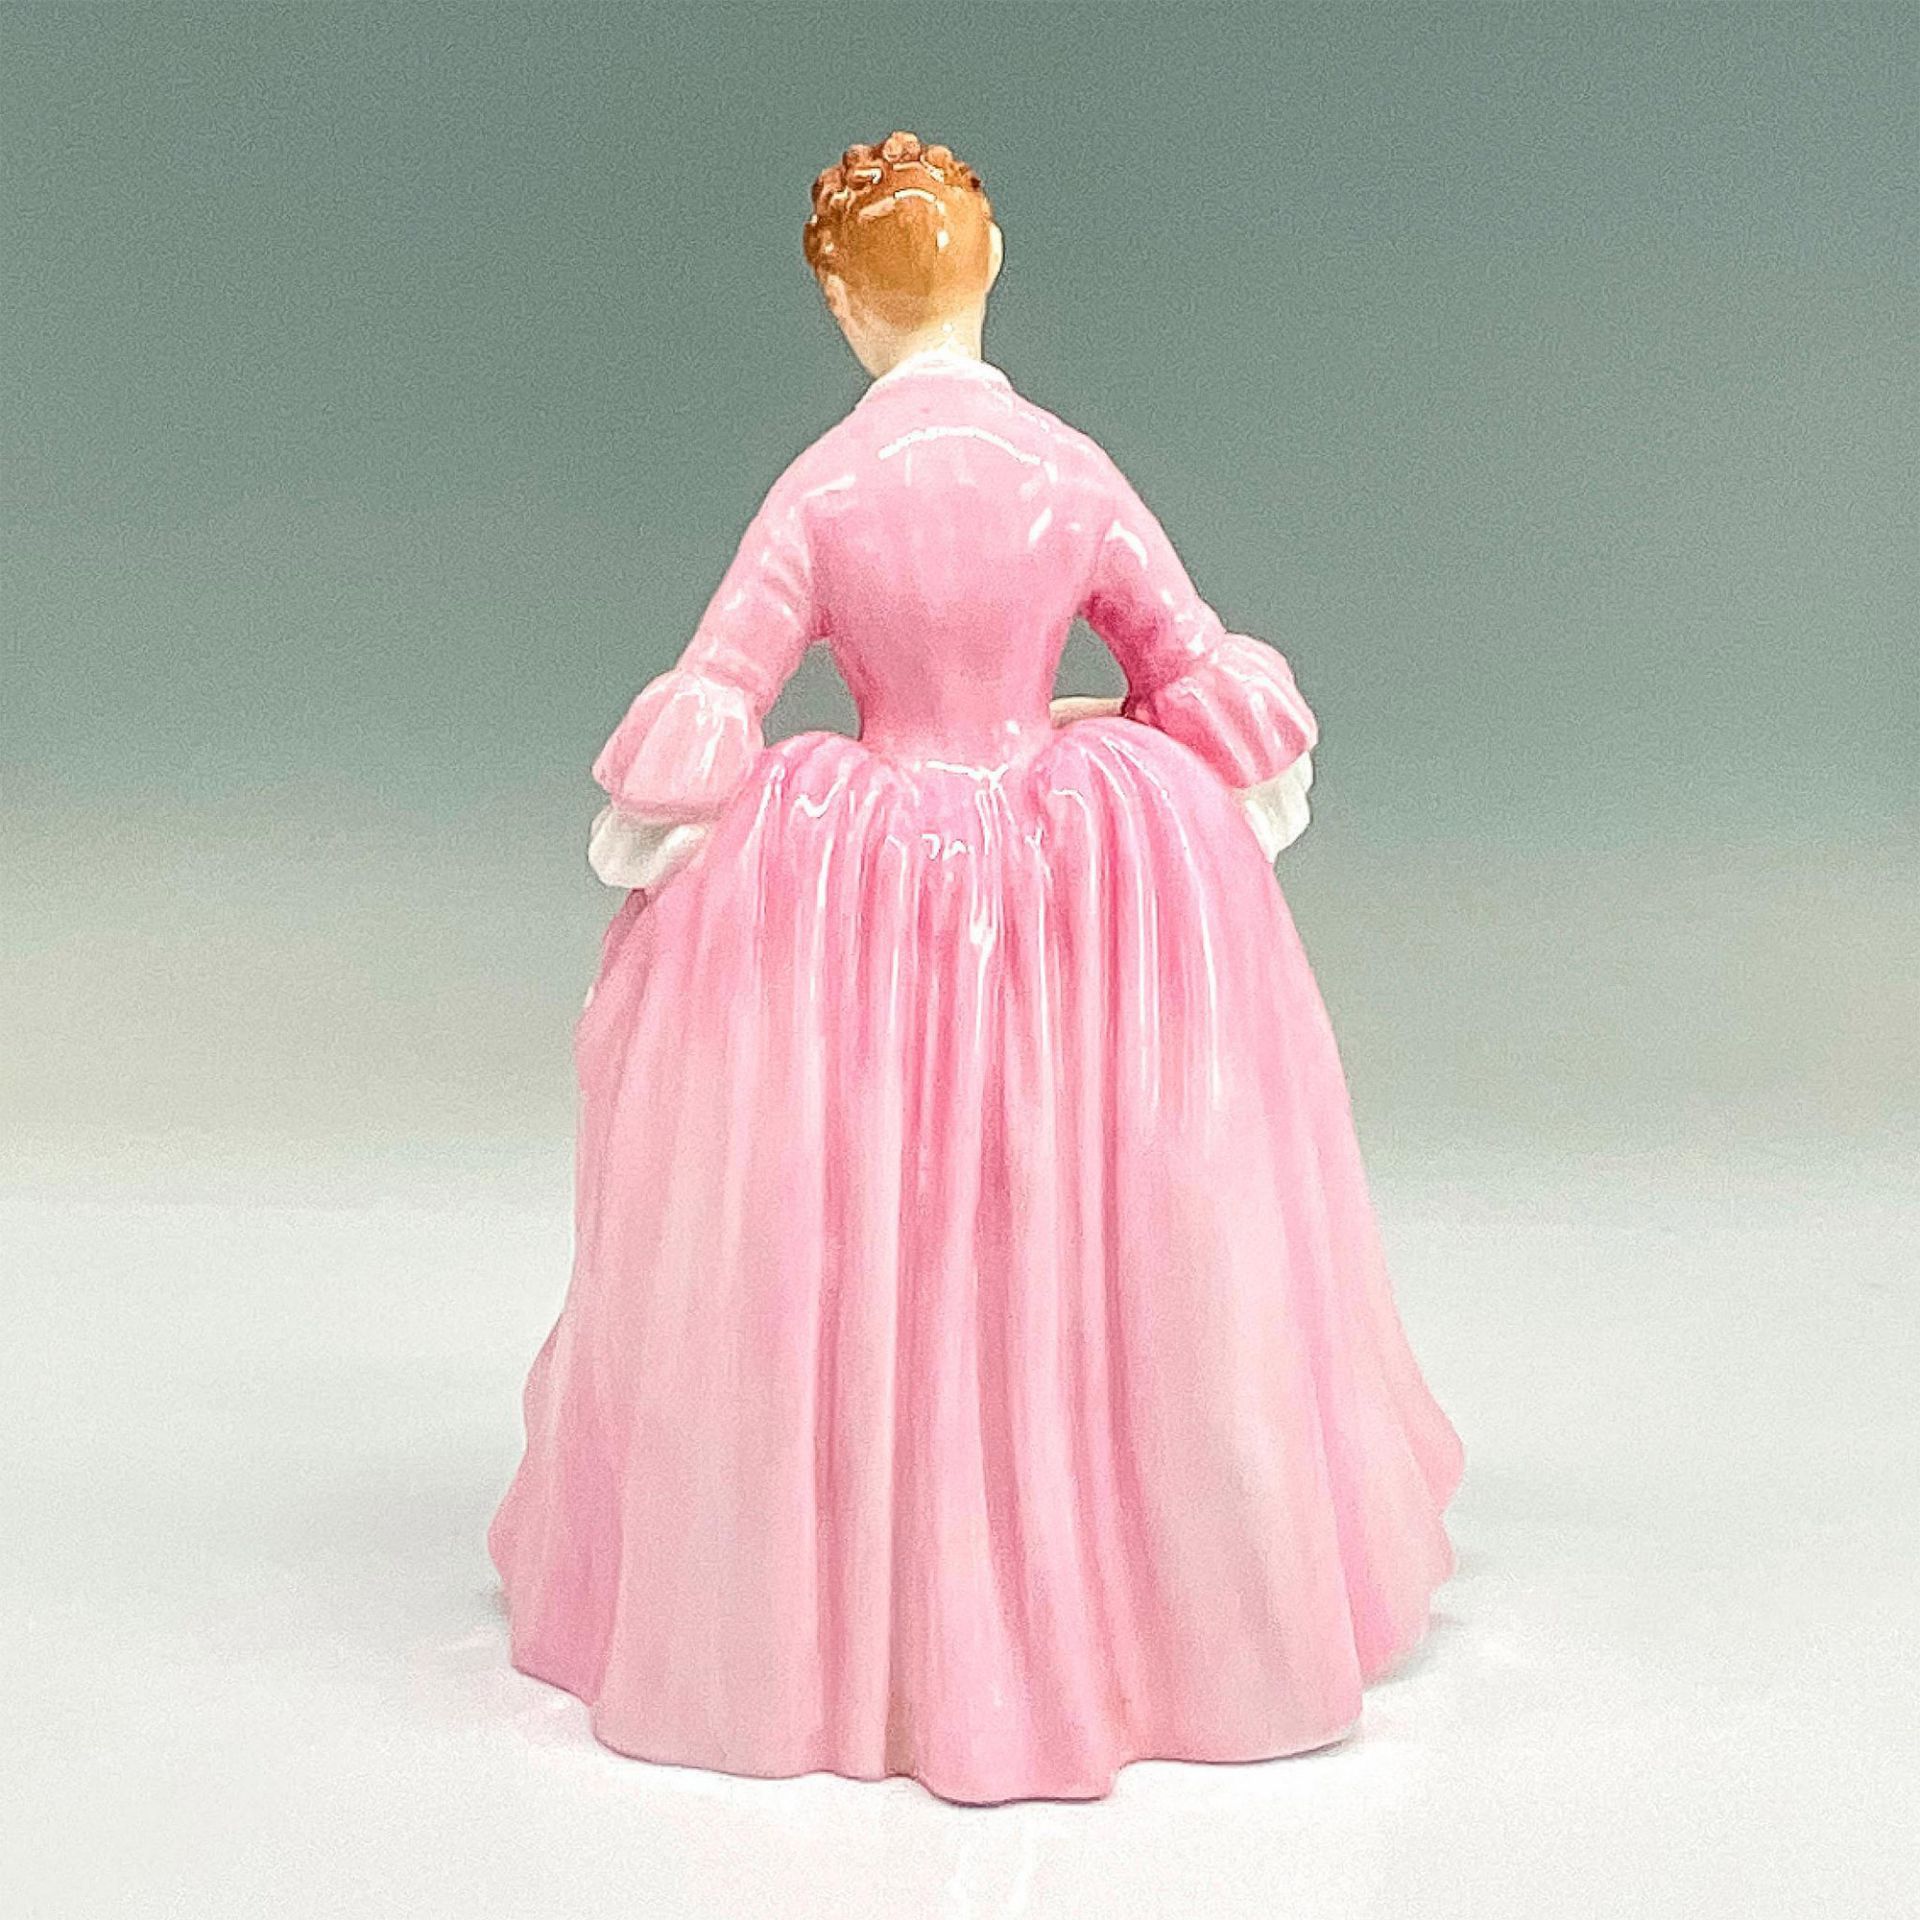 Hostess from Williamsburg - HN2209 - Royal Doulton Figurine - Image 2 of 3